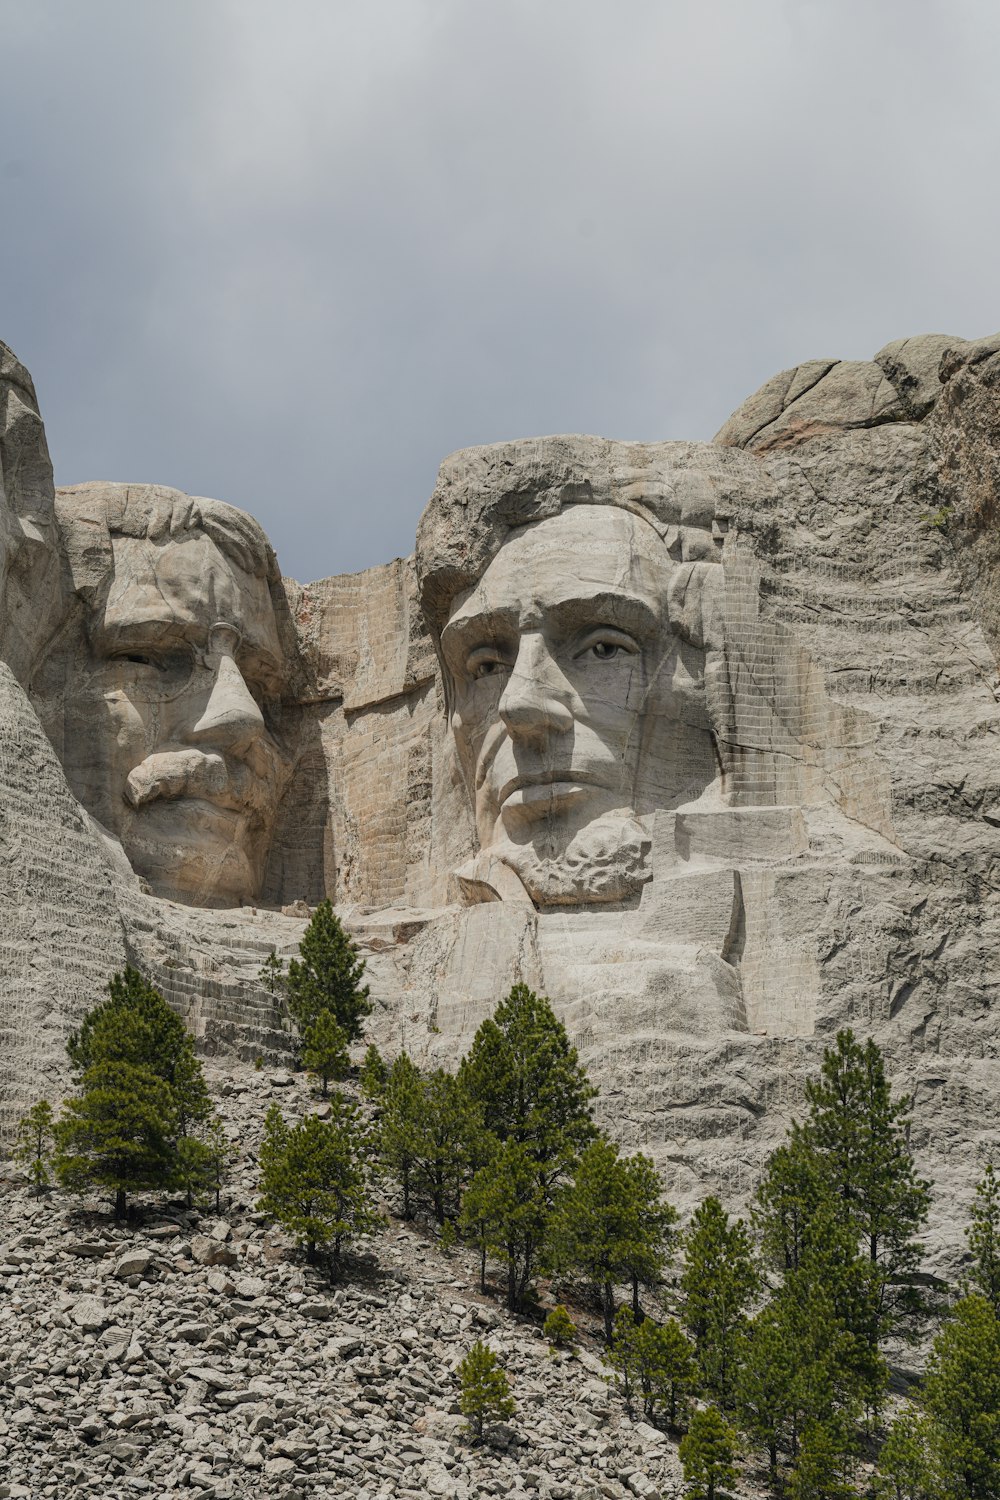 a group of presidents carved into the side of a mountain